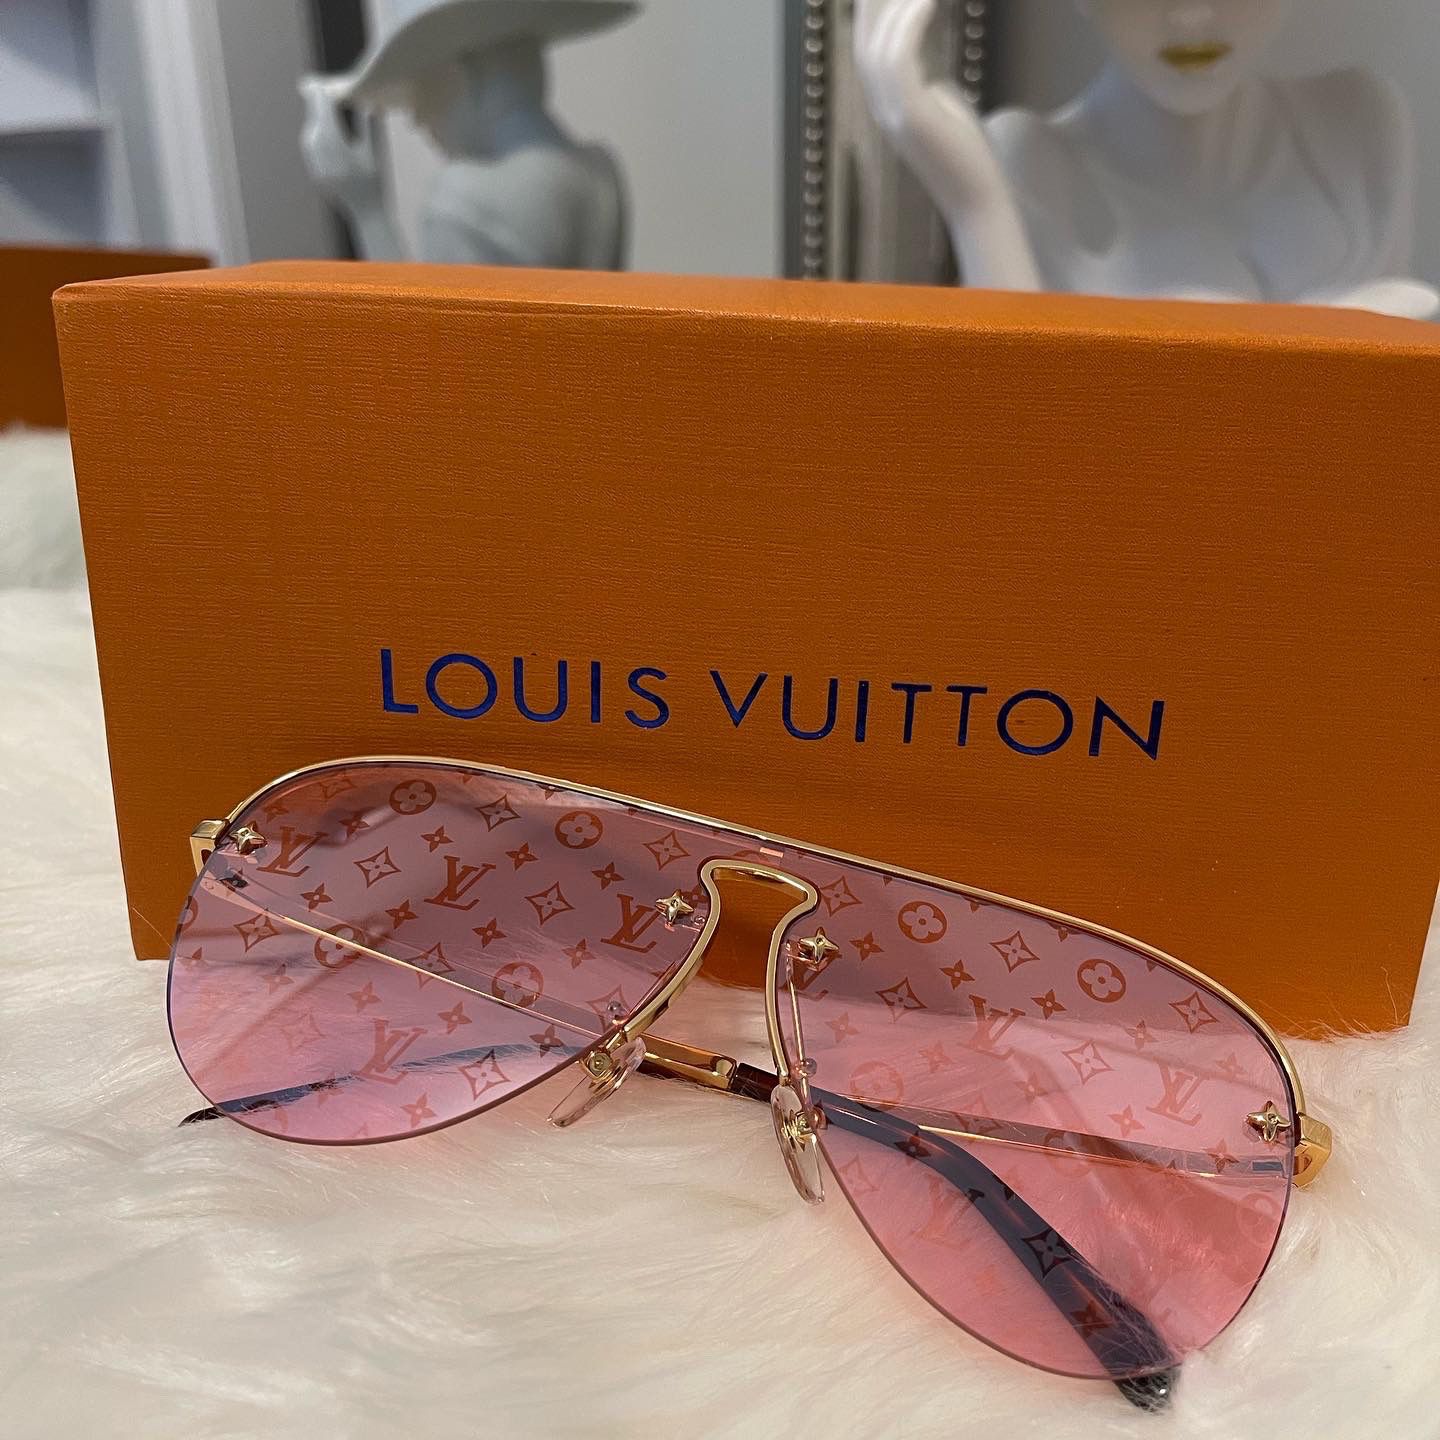 Louis Vuitton Sunglasses for Sale in Katonah, NY - OfferUp